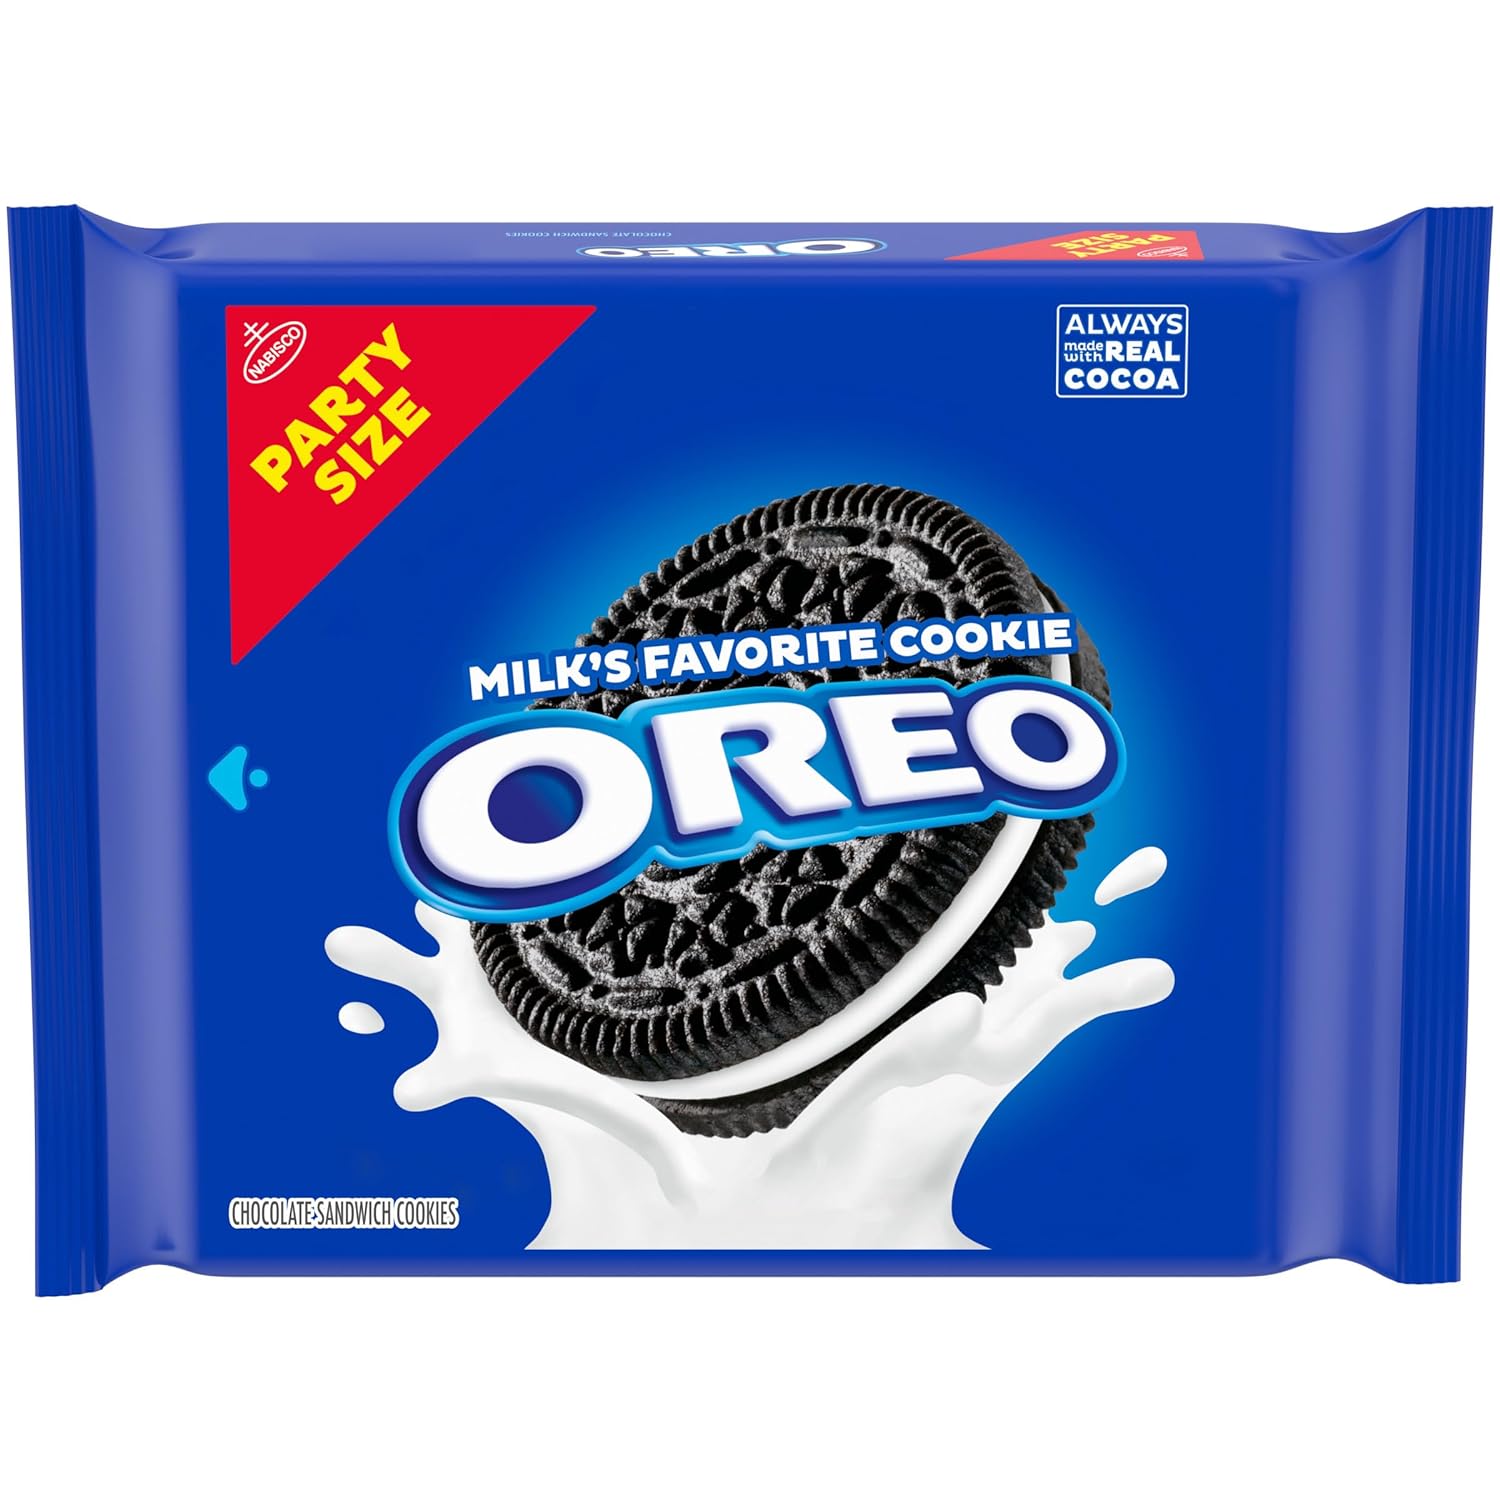 OREO Chocolate Sandwich Cookies, Party Size, 24.16 oz $3.84